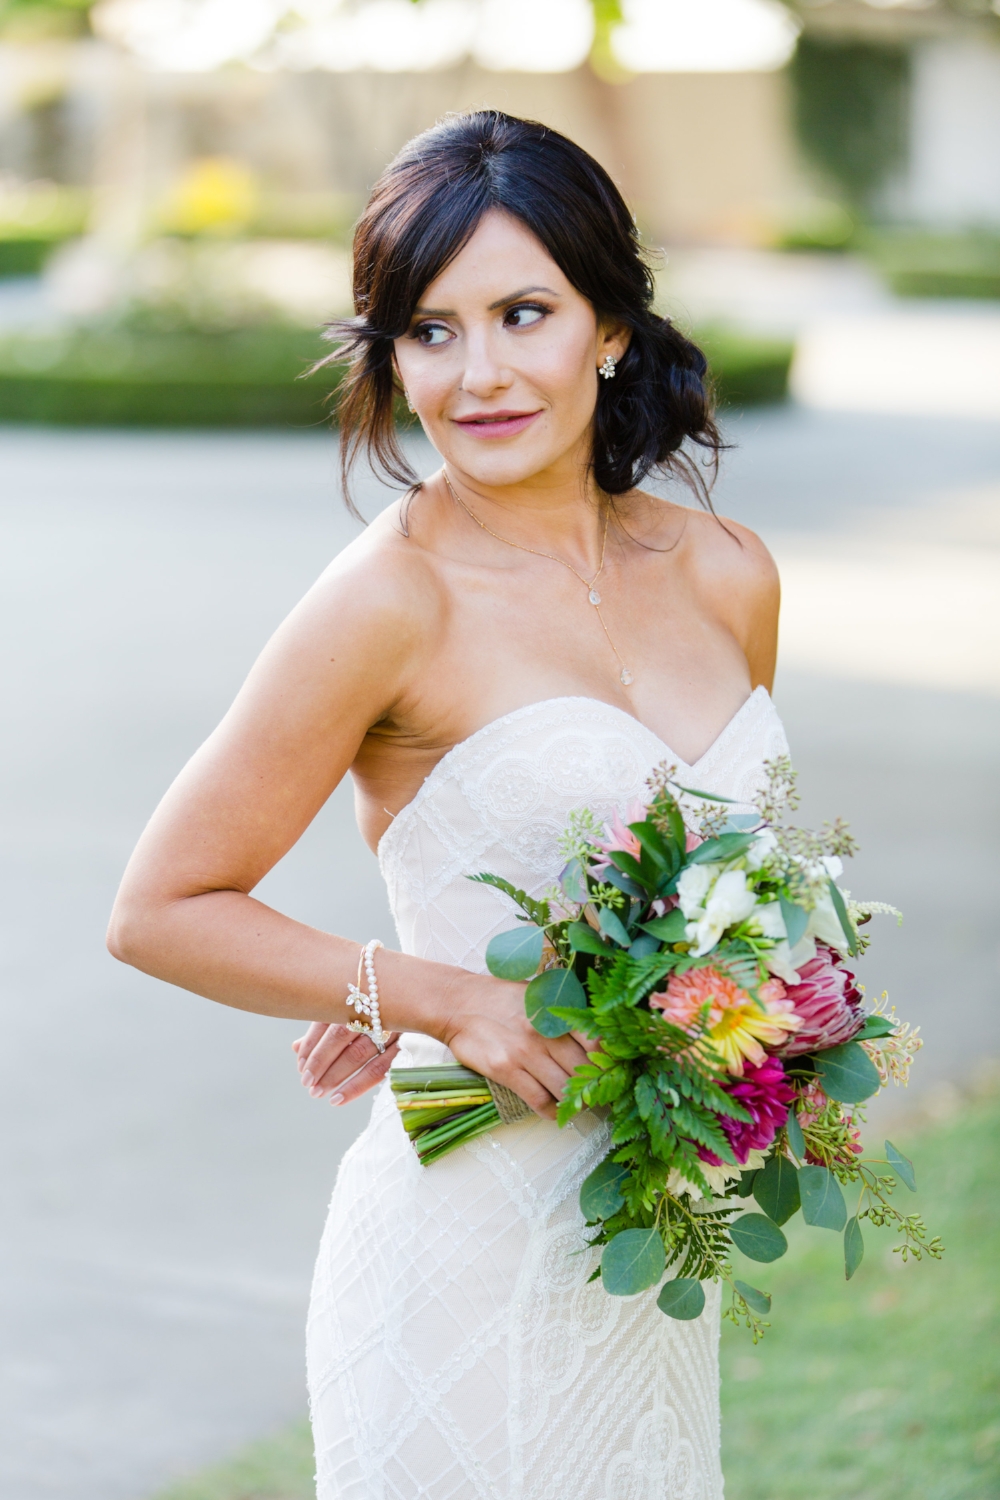 Brunette Bride with Updo holding bouquet outside in Wedding Photography. Bridal Hair and Makeup by Vanity Belle in Orange County (Costa Mesa) and San Diego (La Jolla)